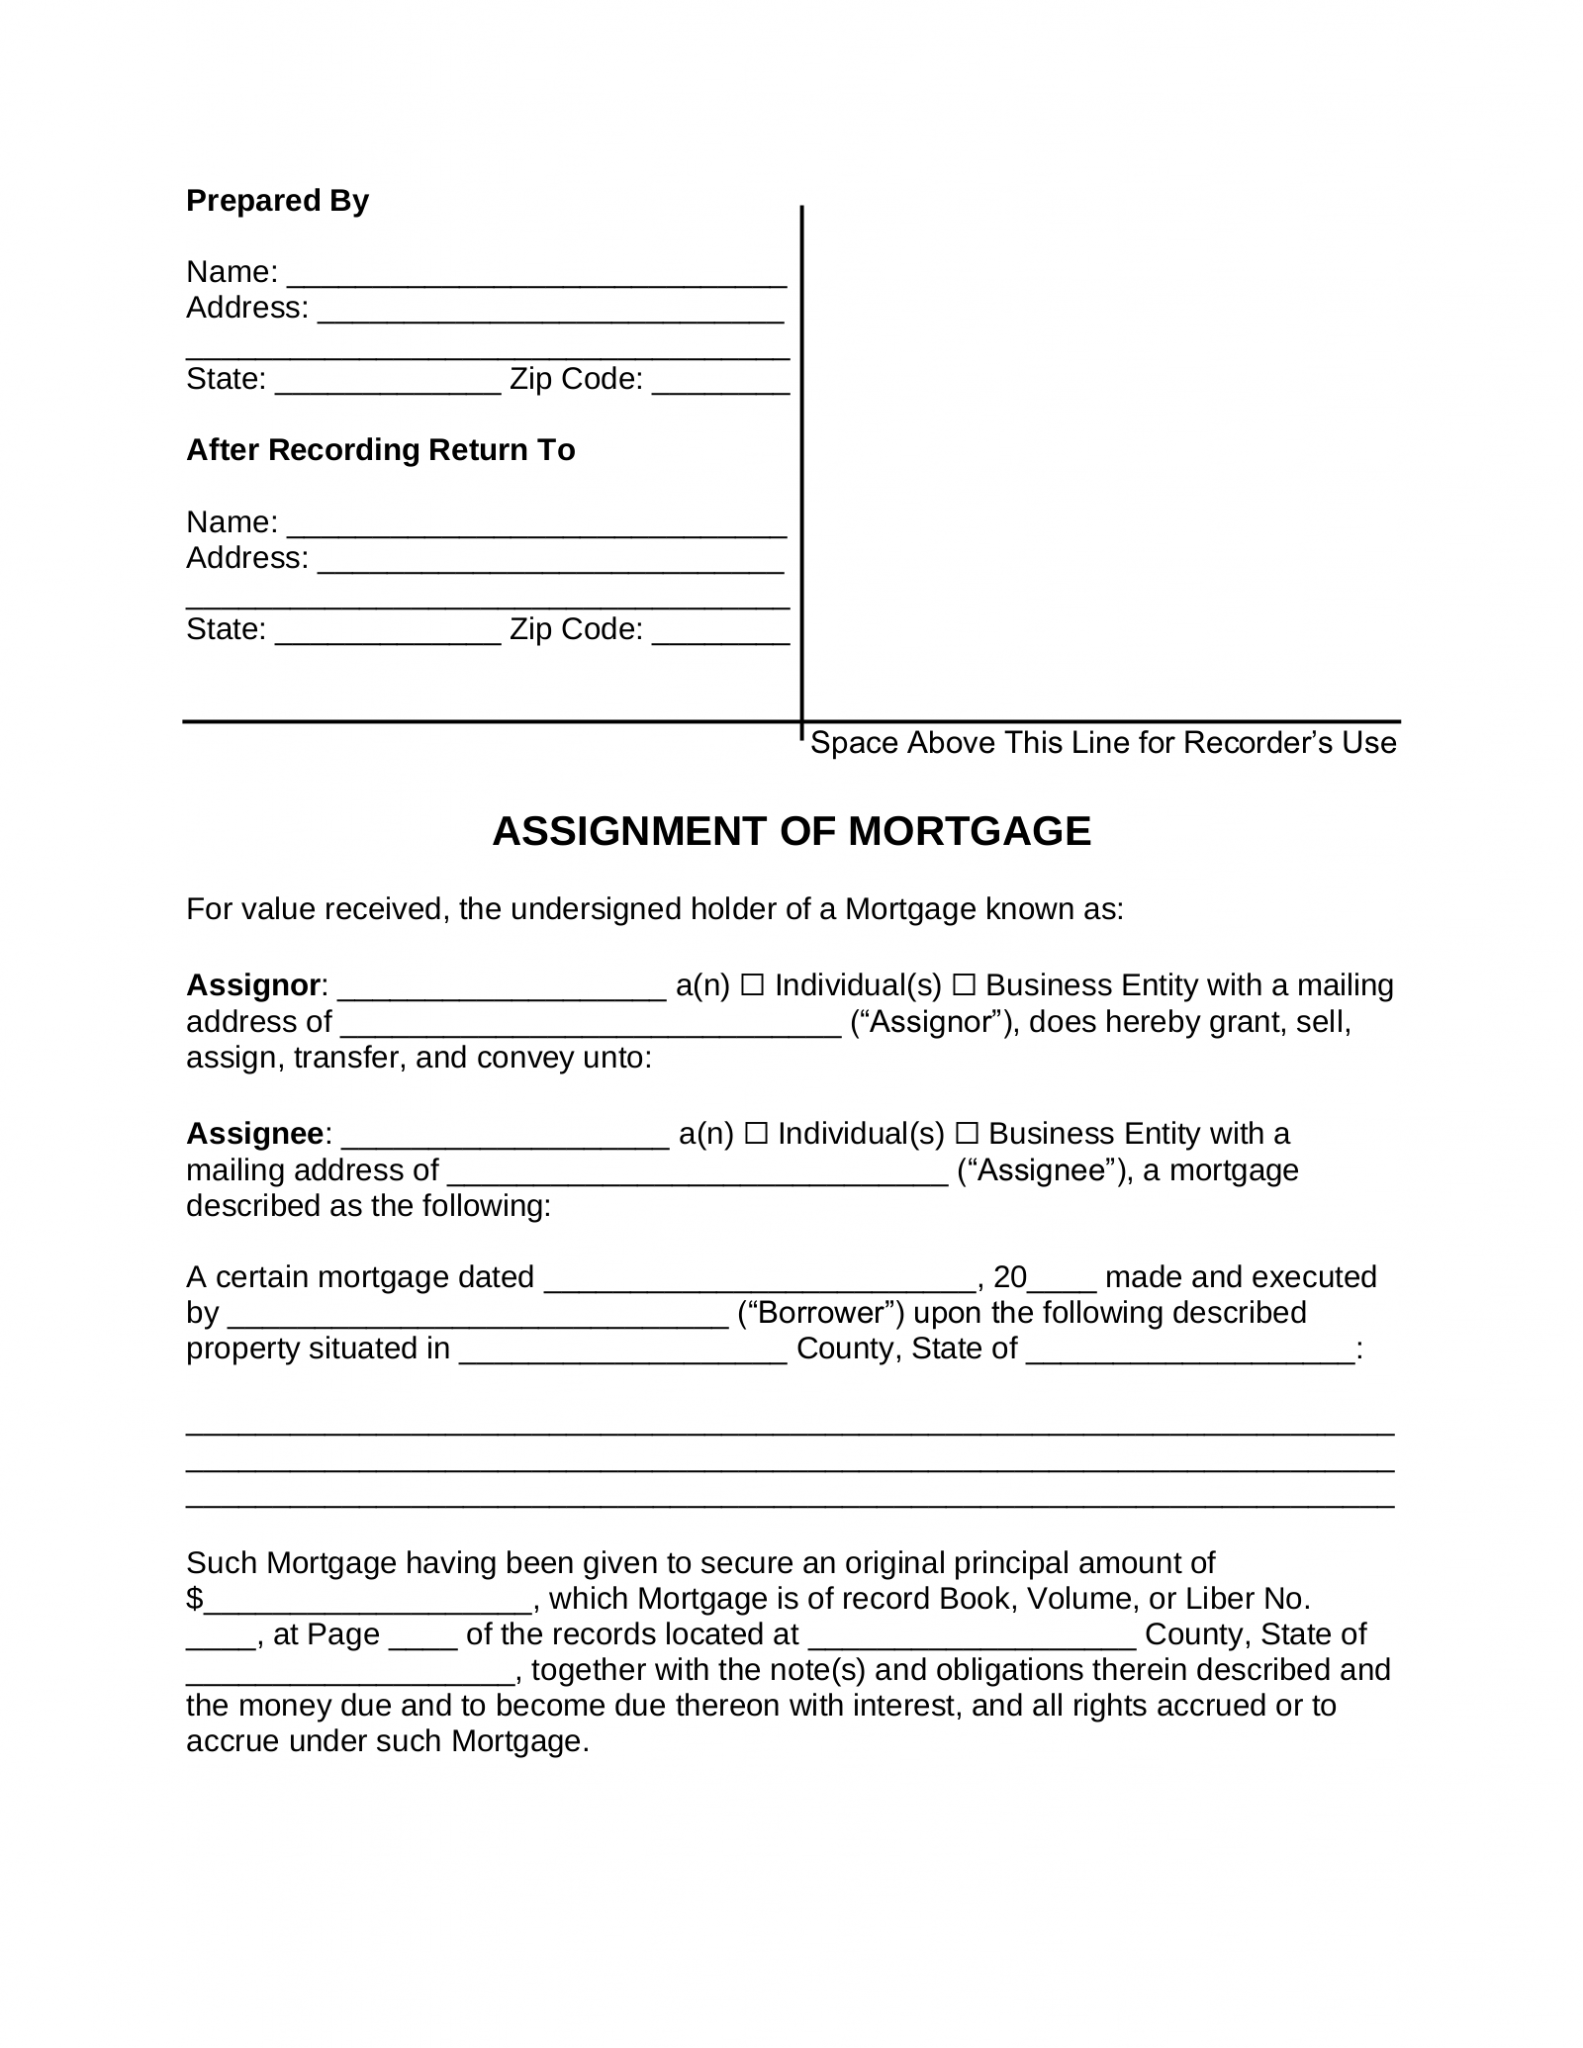 mortgage assignment clause